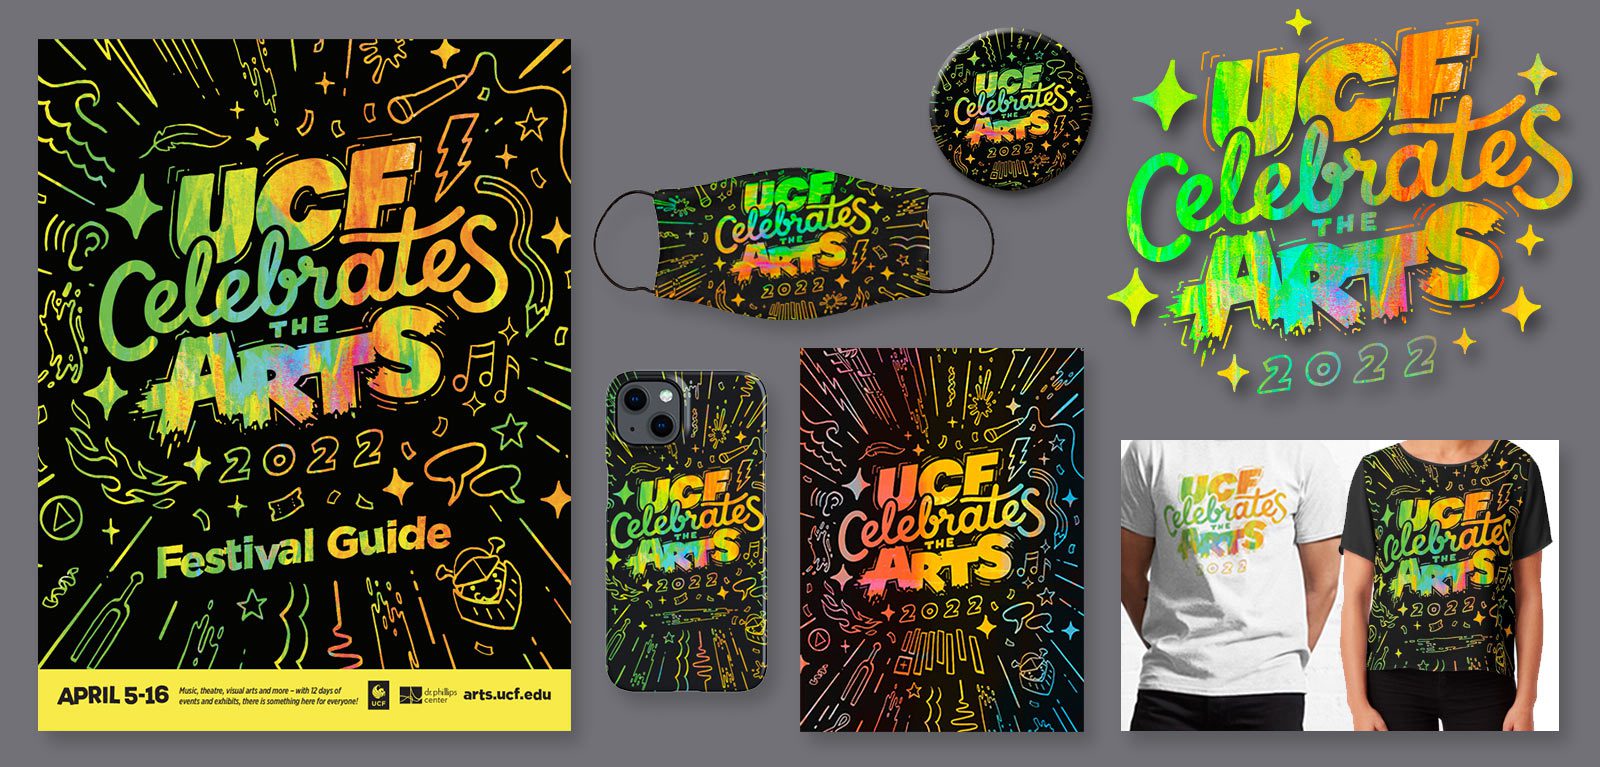 Publication examples from UCF Celebrates the Arts 2022